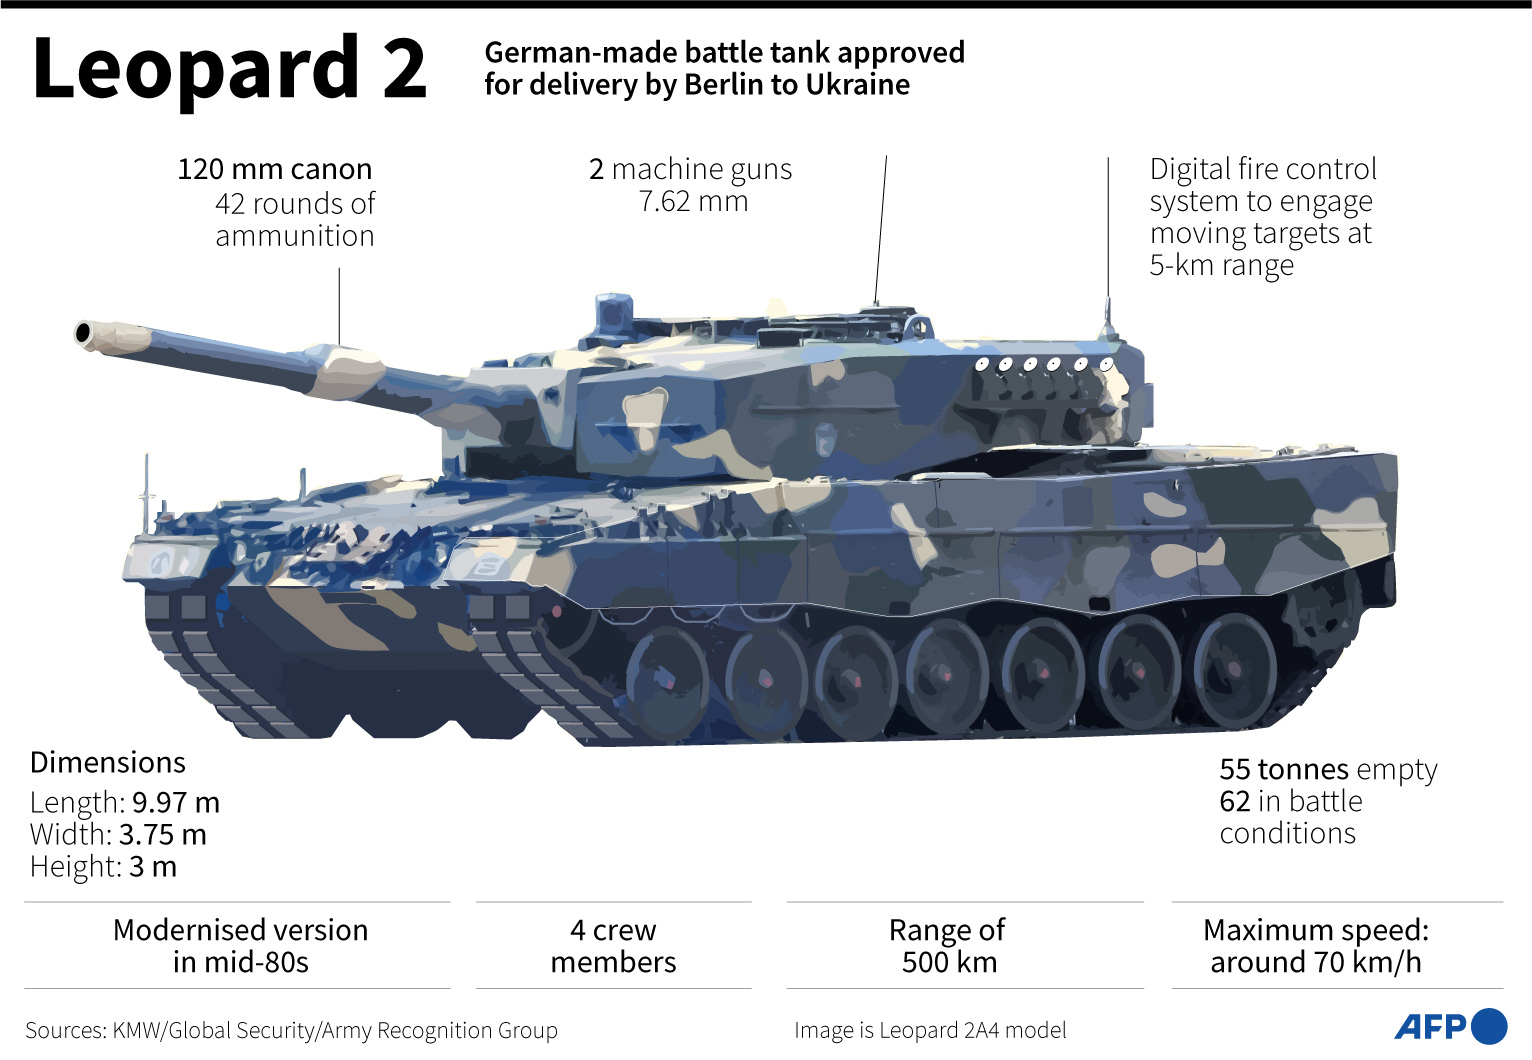 Leopard 2 tanks can now be exported to Ukraine. /Paz Pizarro, Guillermo Rivas Pacheco/AFP